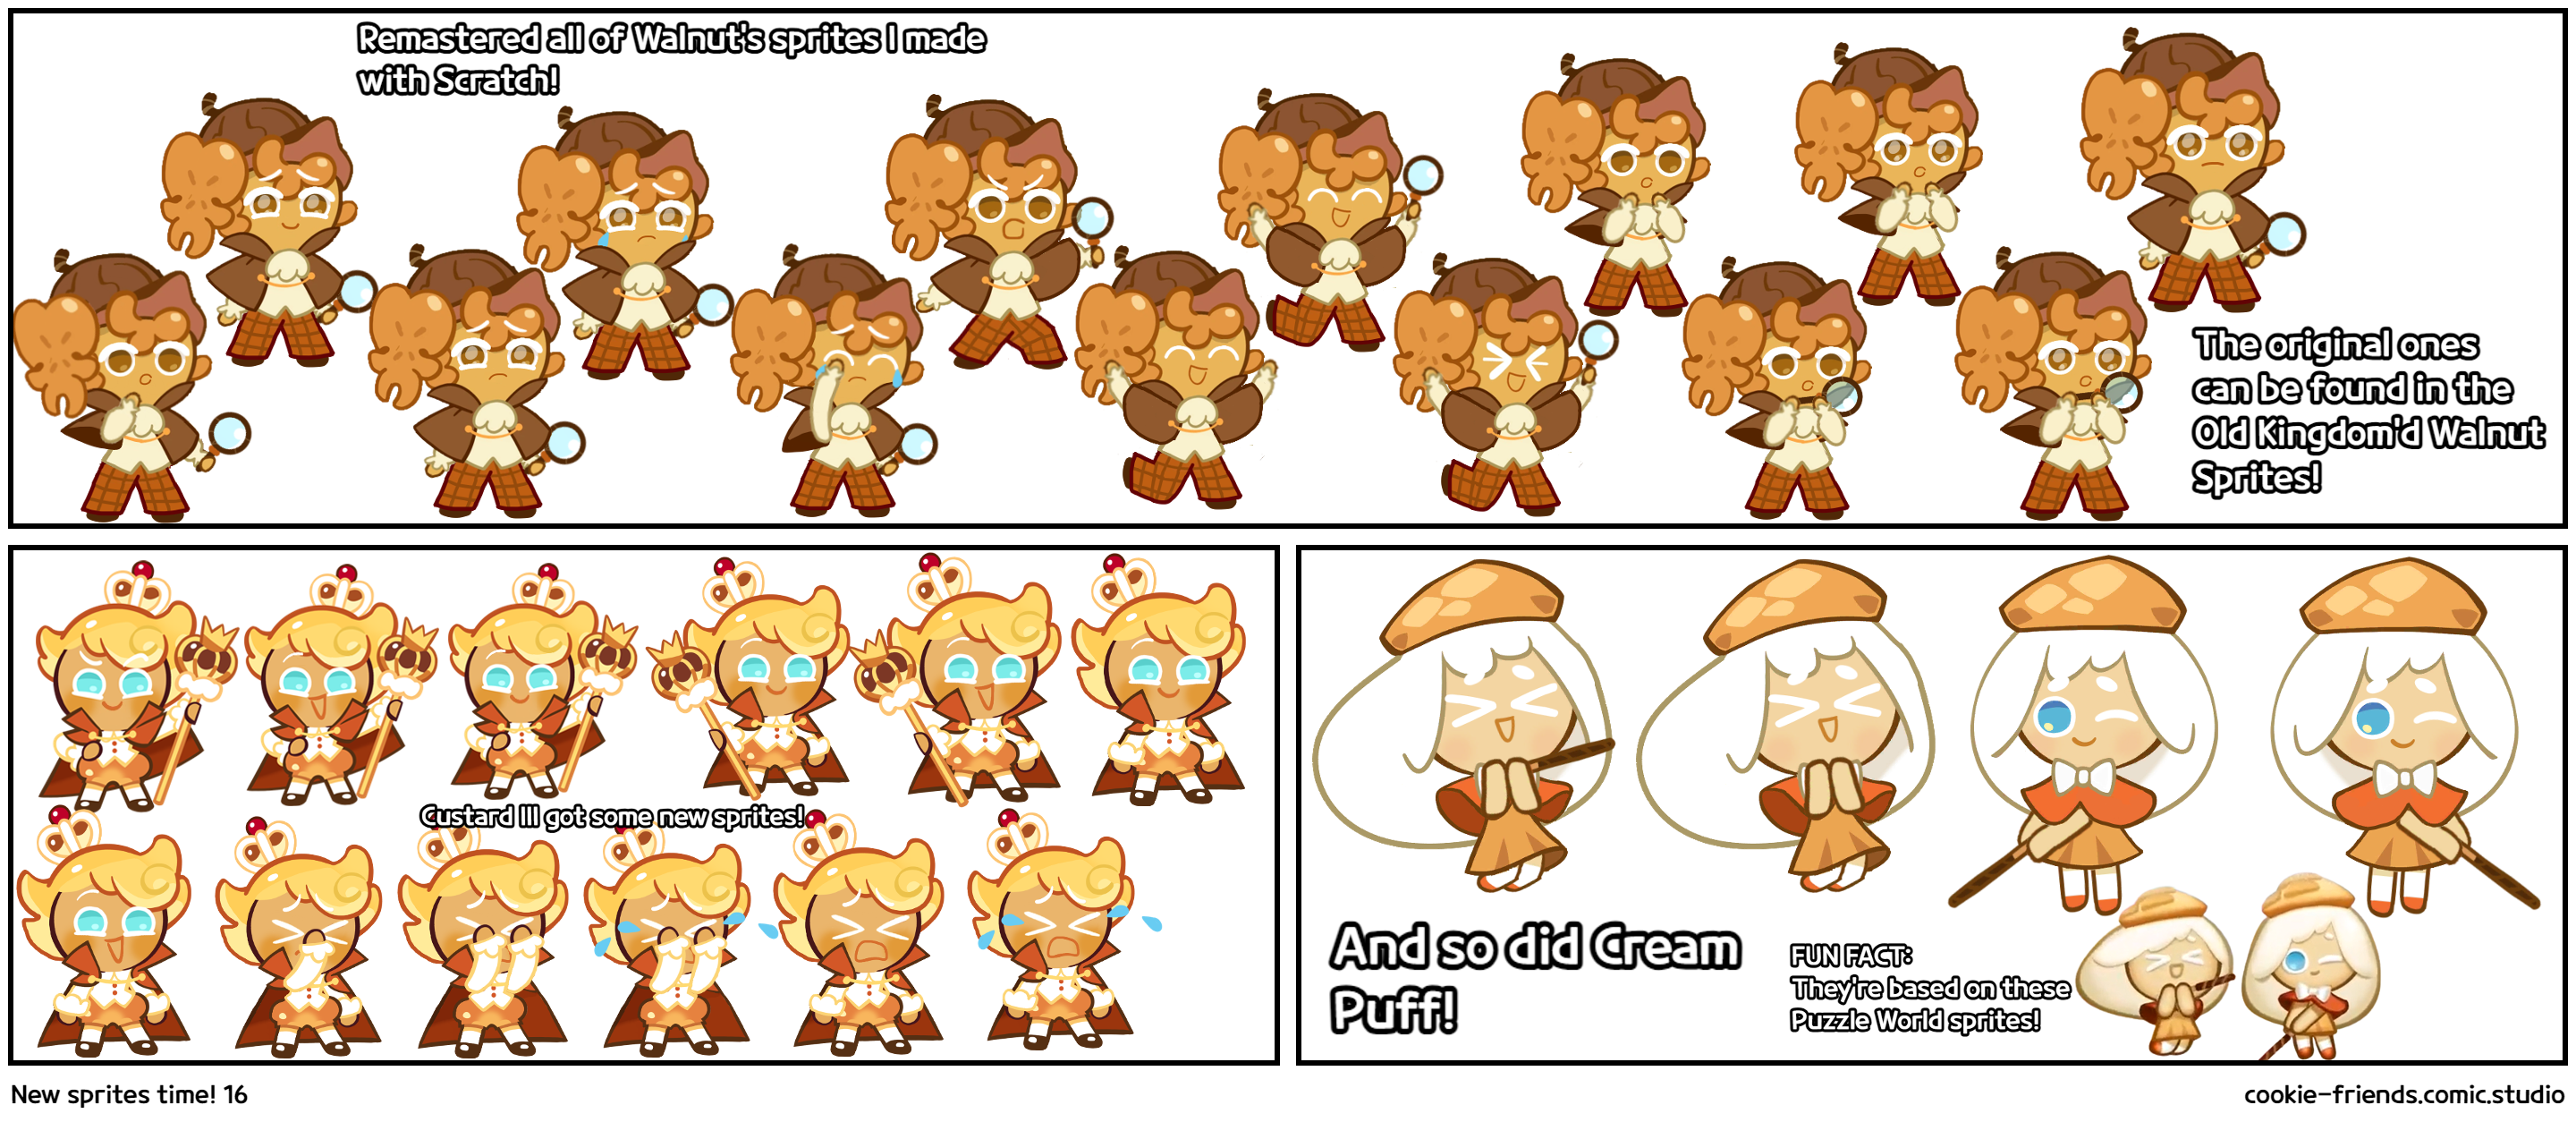 New sprites time! 16